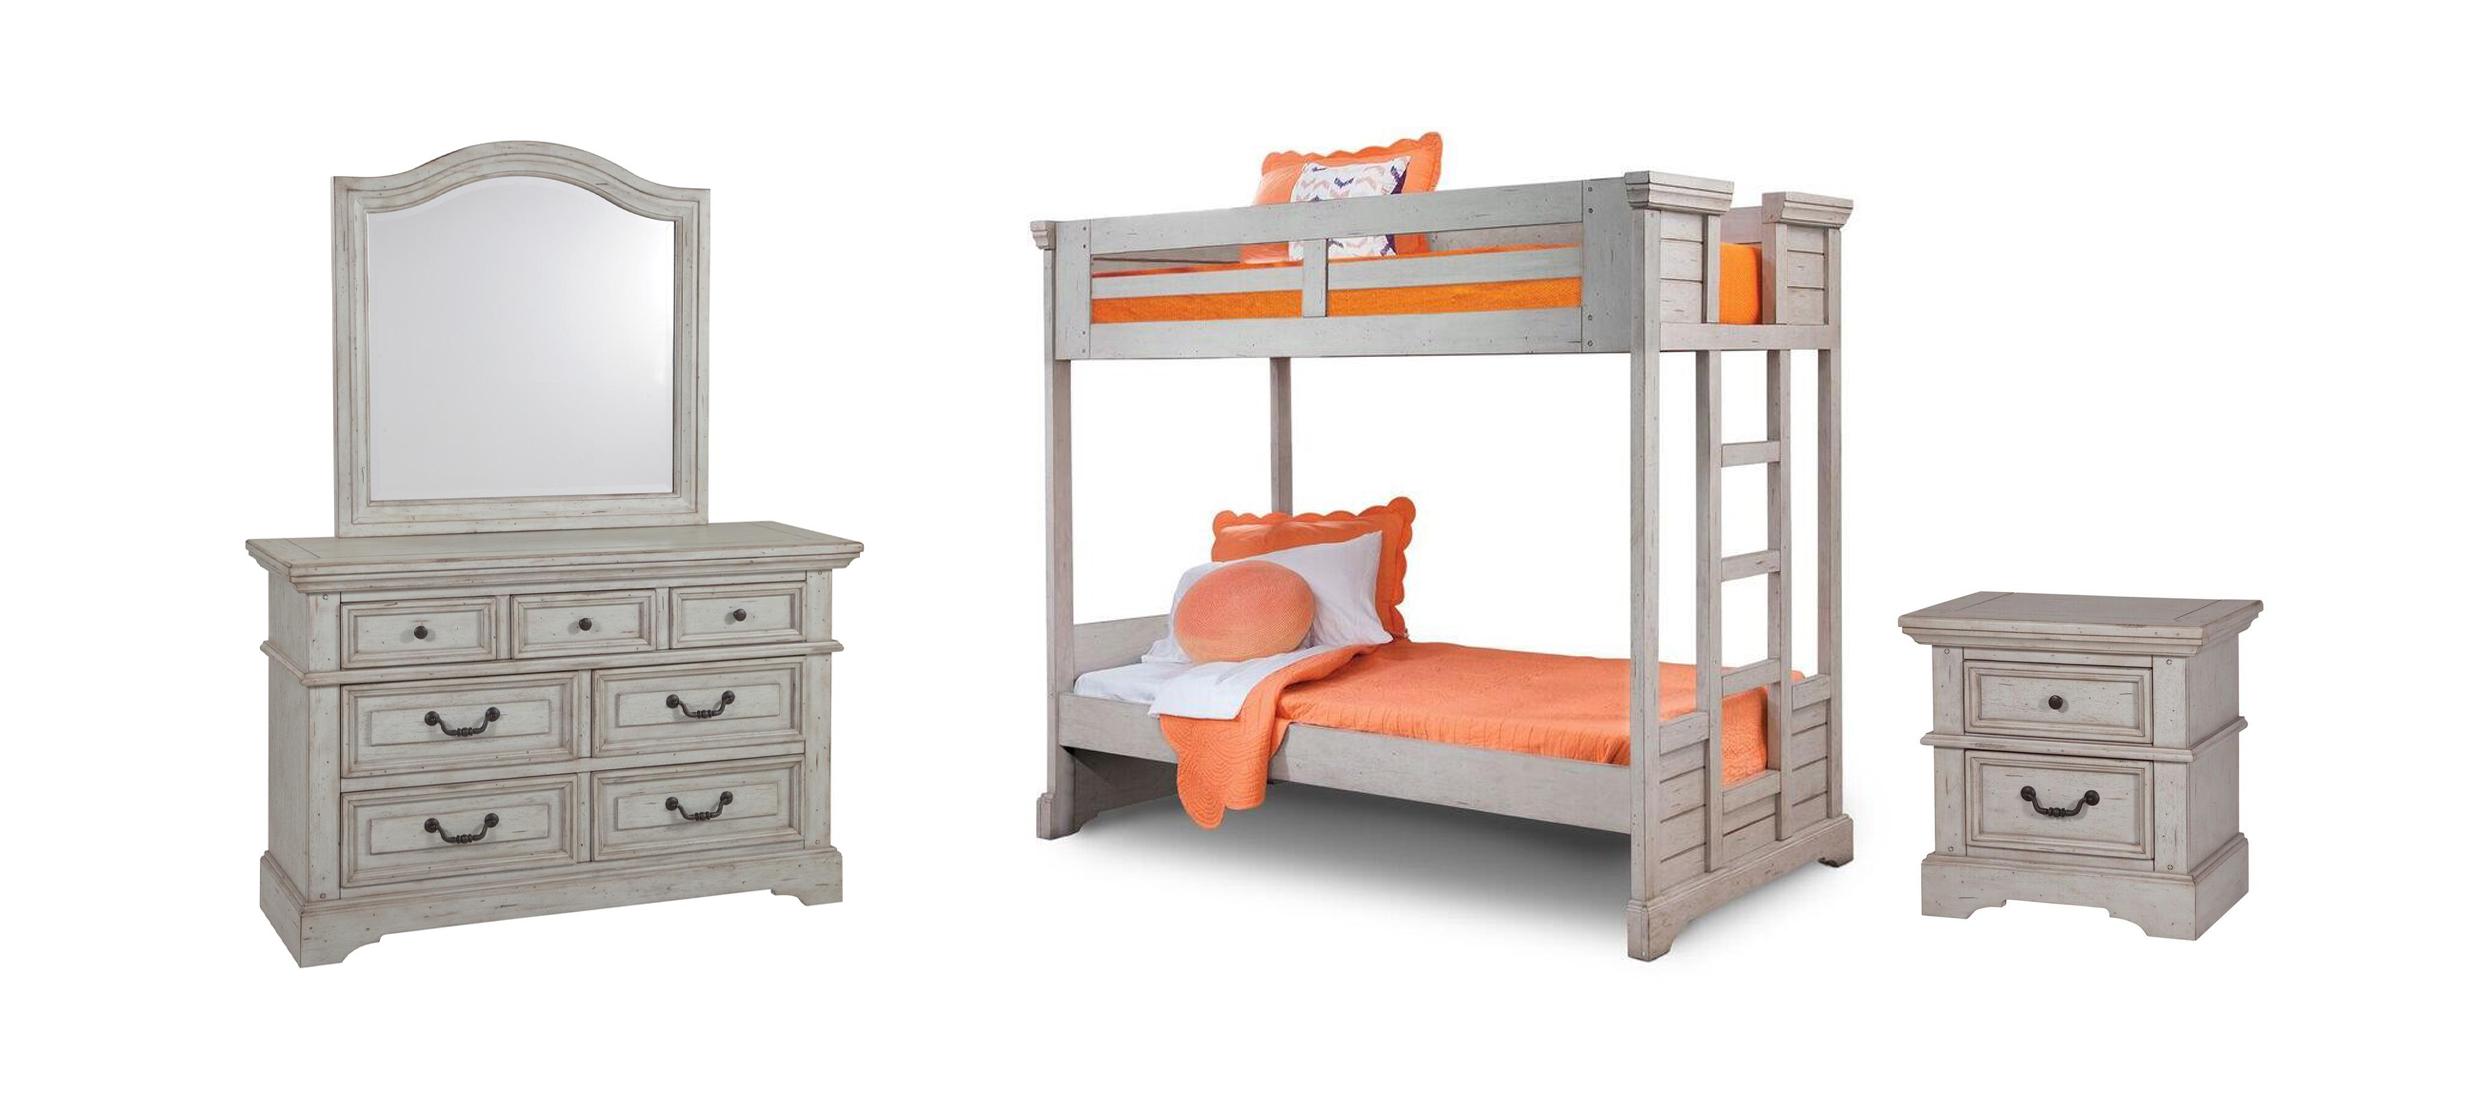 Classic, Traditional Twin Bunk Bed Set 7820 STONEBROOK 7820-33BNK-NDM-4PC in Antique, Gray 